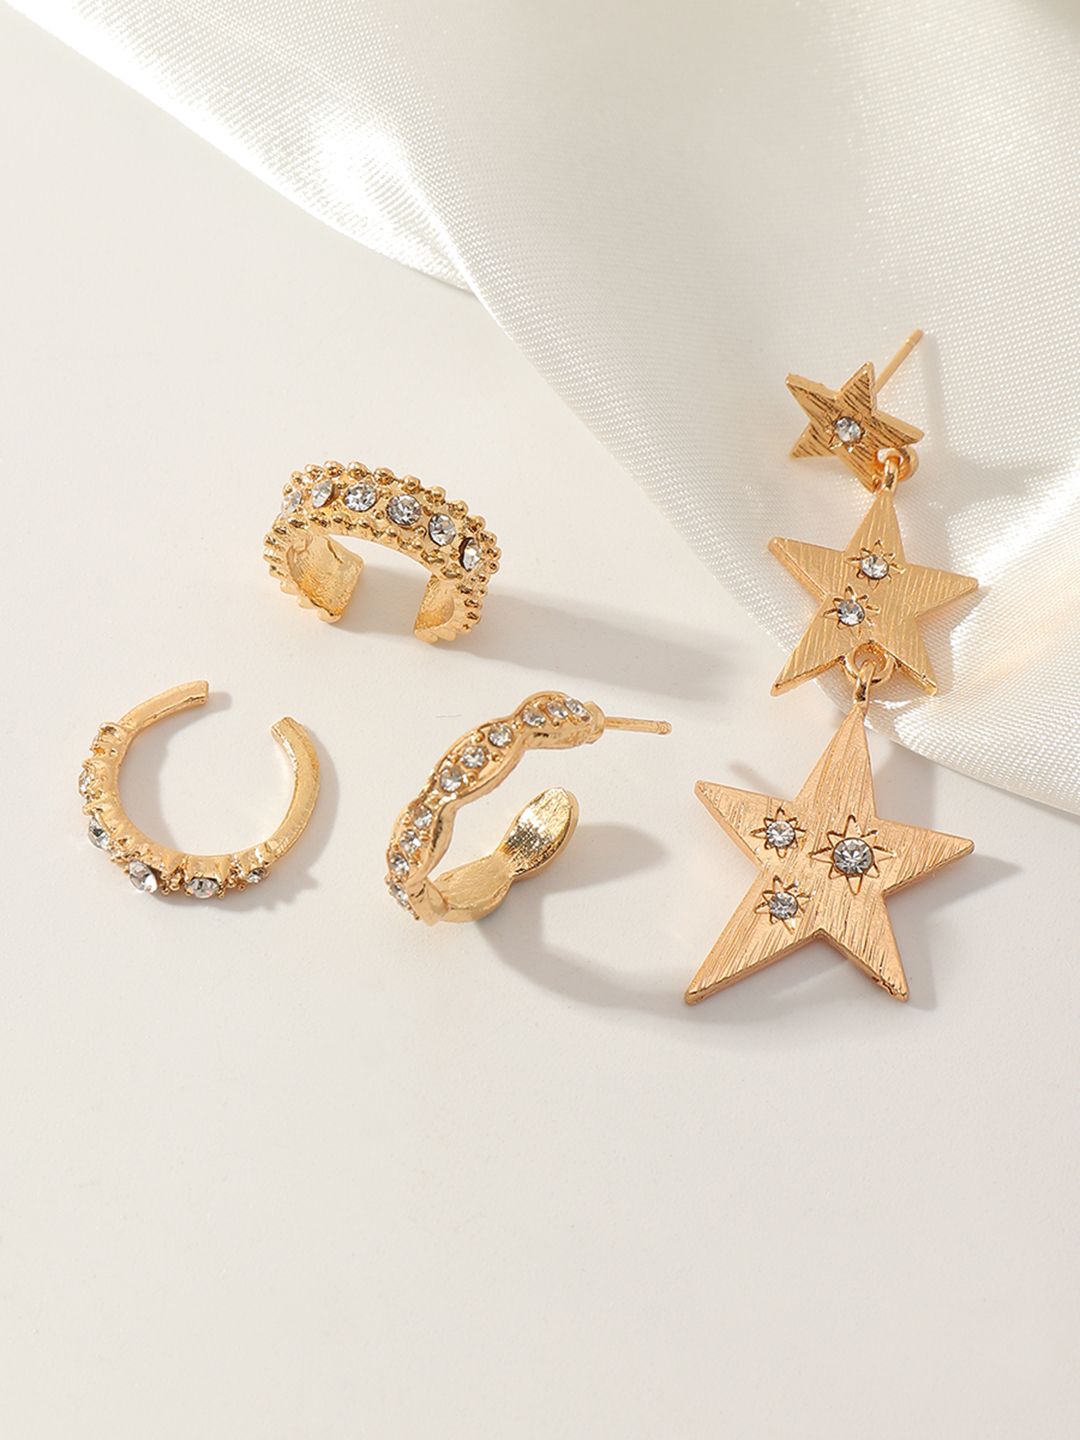 URBANIC Gold-Toned Set of 4 Star Shaped & Hoop Earrings Price in India